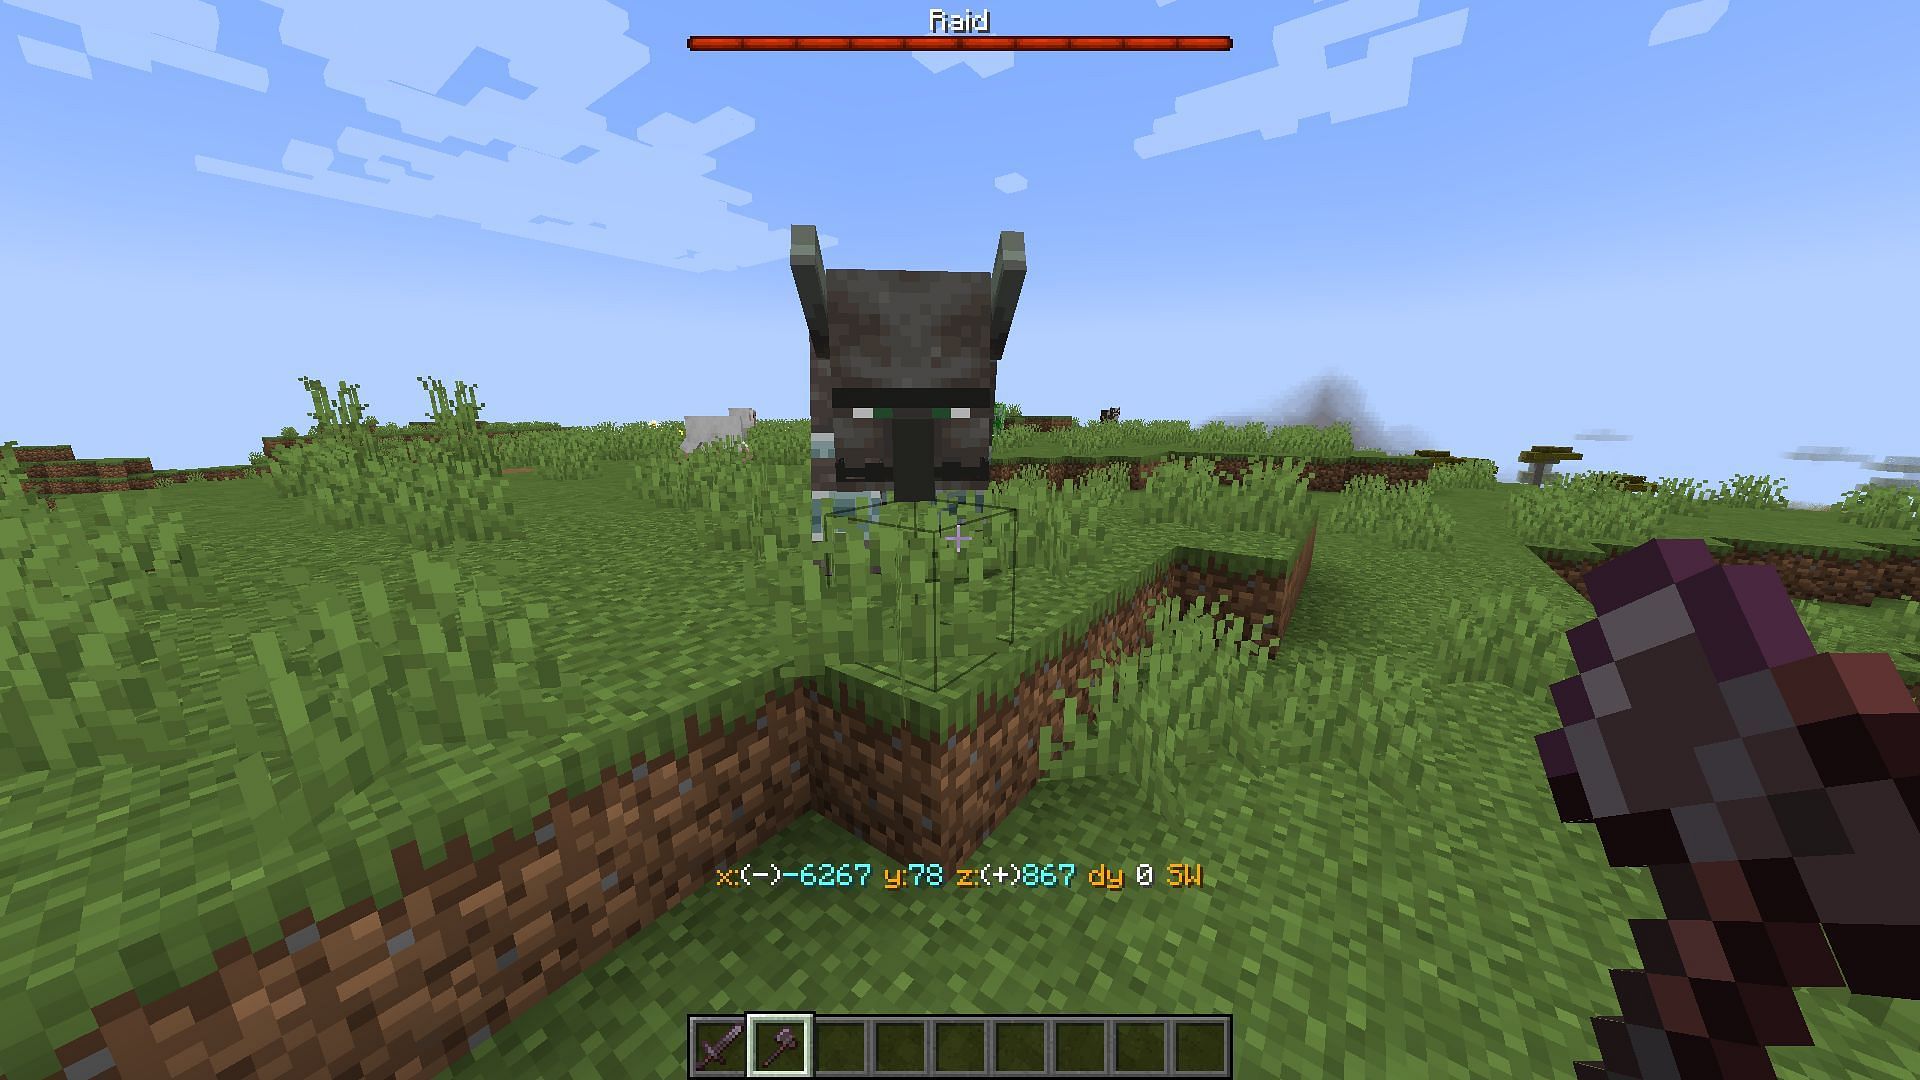 Ravagers only spawn in raids and are pretty hard to kill in Minecraft (Image via Mojang)